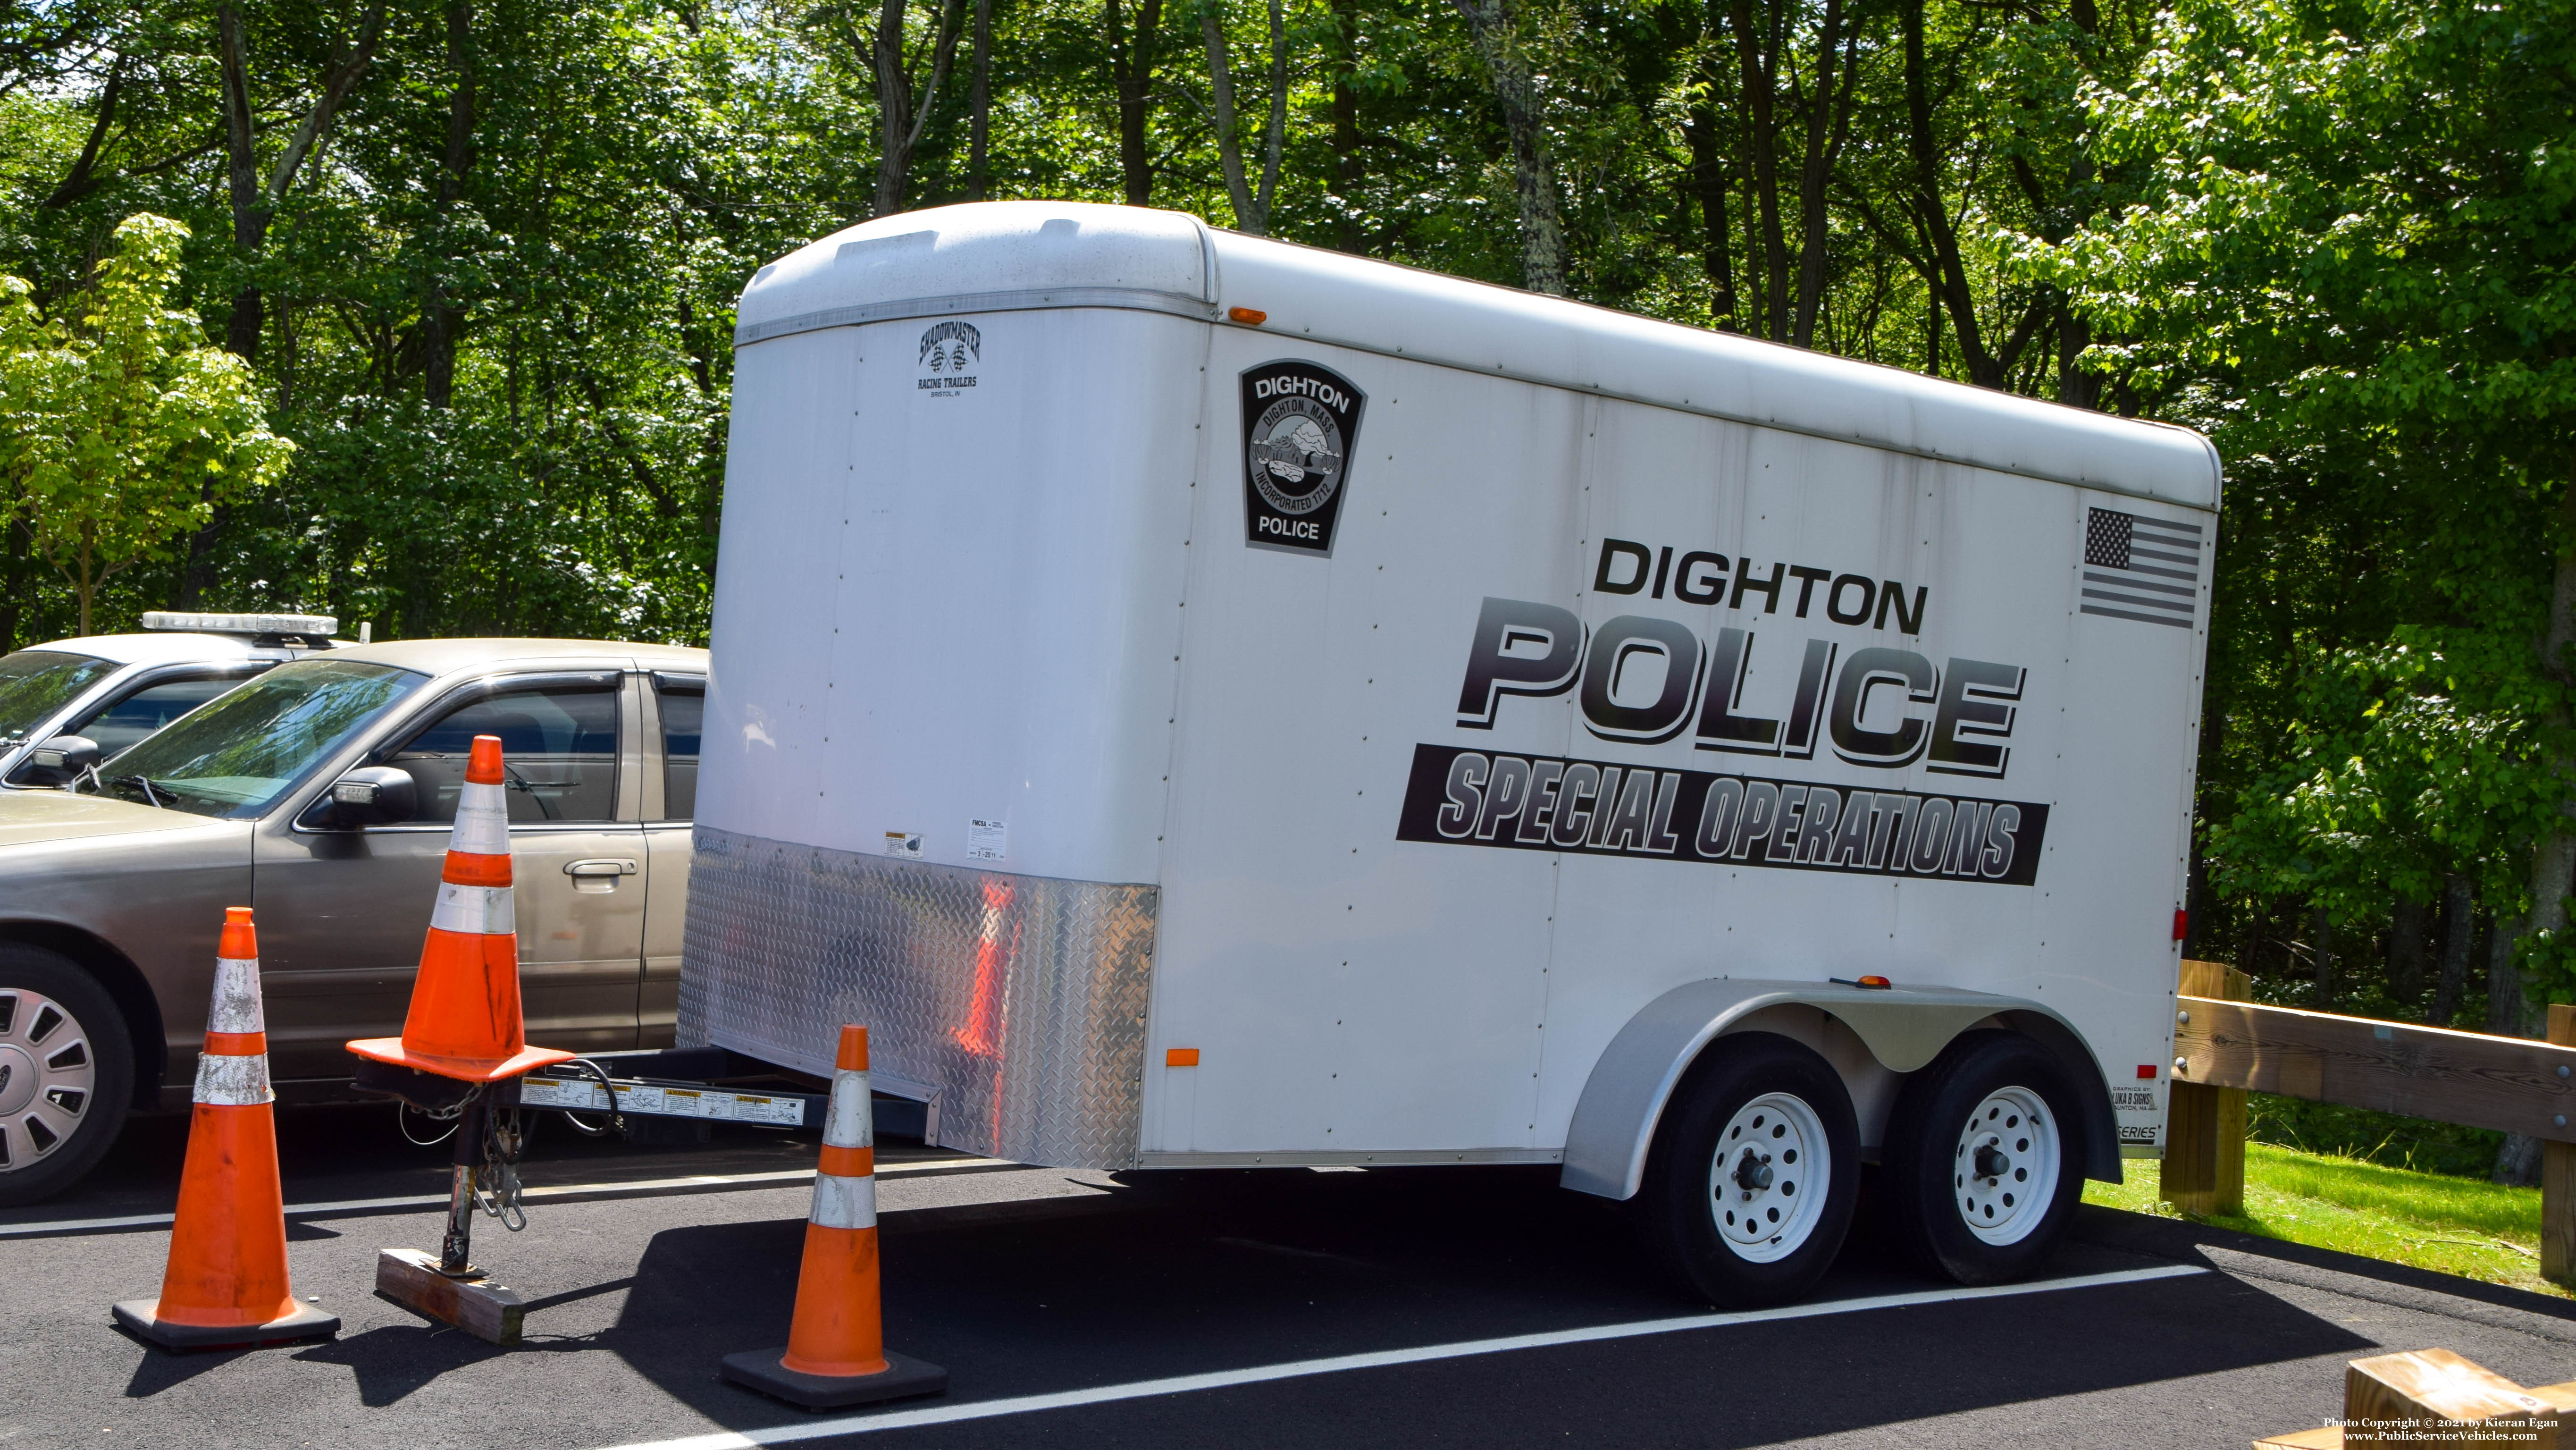 A photo  of Dighton Police
            Special Operations Trailer, a 2006 Shadowmaster Trailers             taken by Kieran Egan